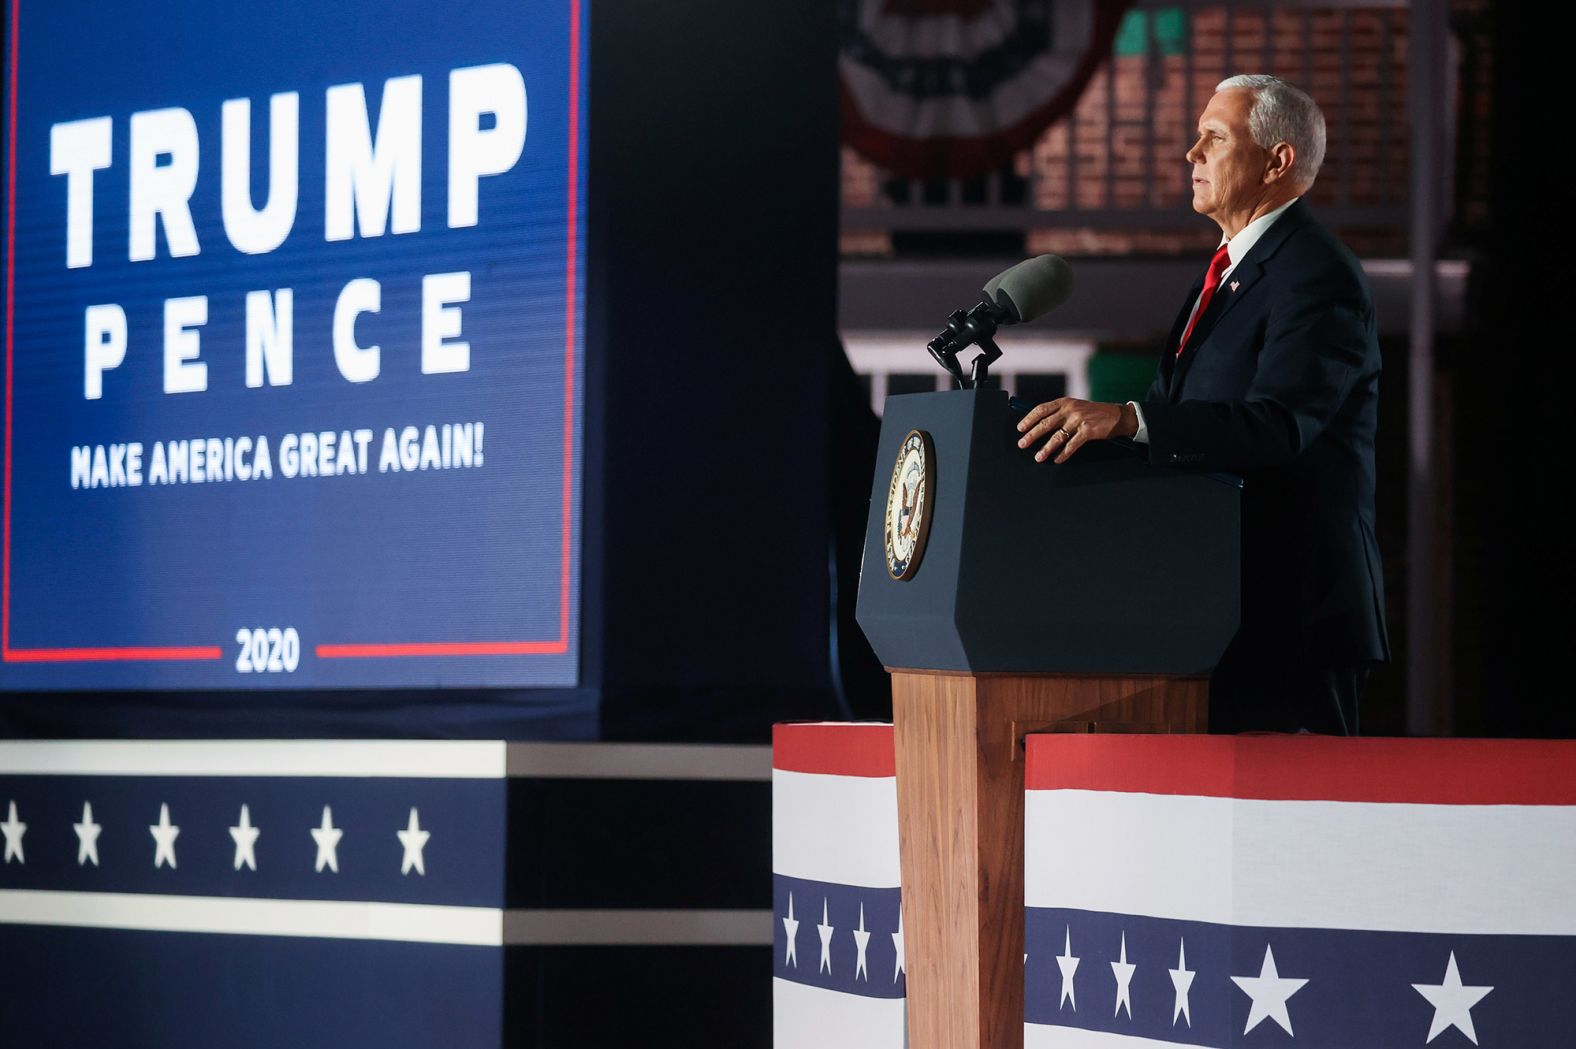 Pence used a portion of his remarks <a href="index.php?page=&url=https%3A%2F%2Fwww.cnn.com%2Fpolitics%2Flive-news%2Frnc-2020-day-3%2Fh_0591184c0cd7092d7536dffefbeba833" target="_blank">to deliver a pro-police "law and order" message.</a> "Let me be clear: the violence must stop, whether in Minneapolis, Portland, or Kenosha." He said he and Trump "will always support the right of Americans to peaceful protest, but rioting and looting is not peaceful protest. Tearing down statues is not free speech. Those who do so will be prosecuted to the fullest extent of the law."